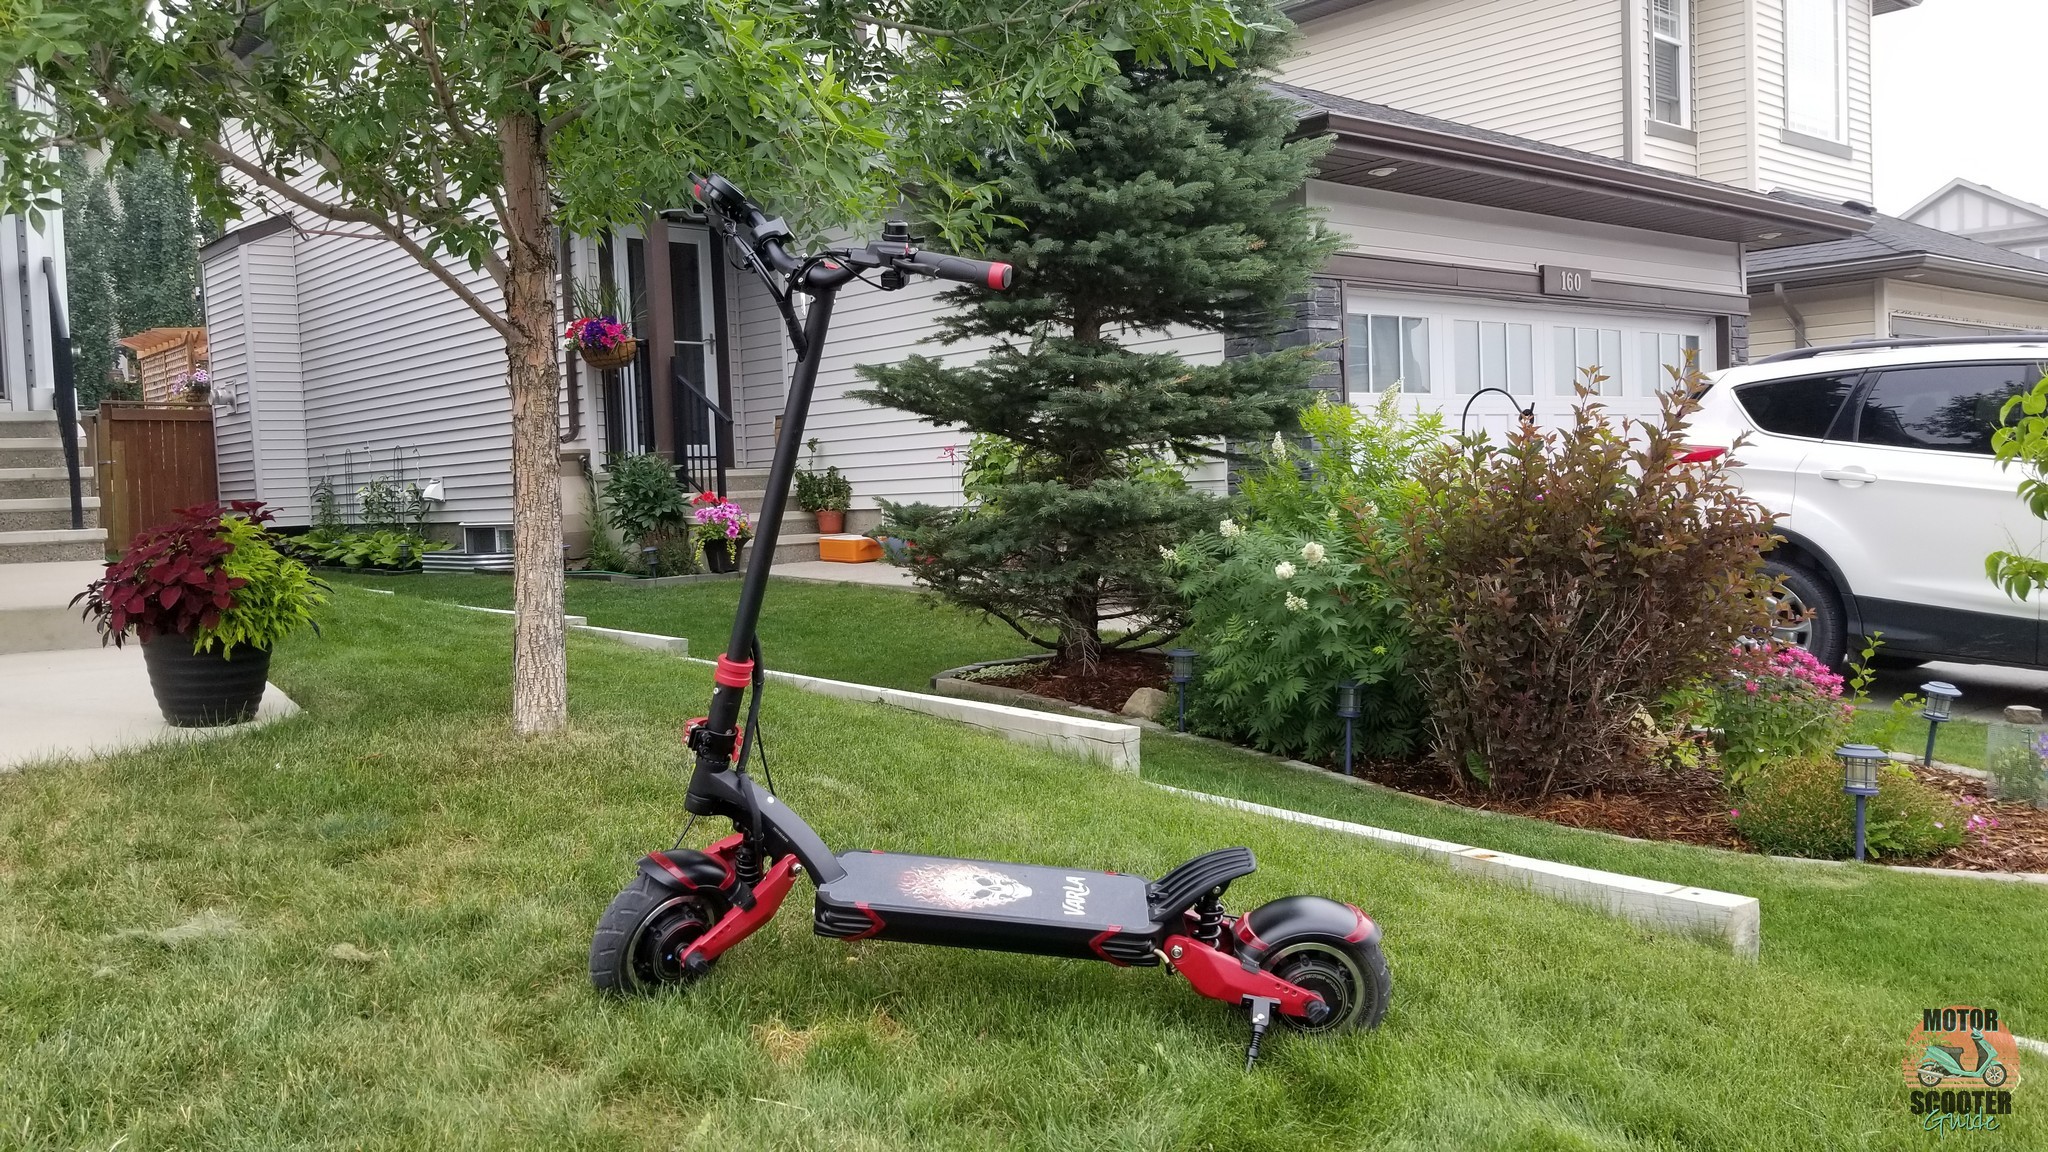 Fully assembled Varla Eagle One on front lawn